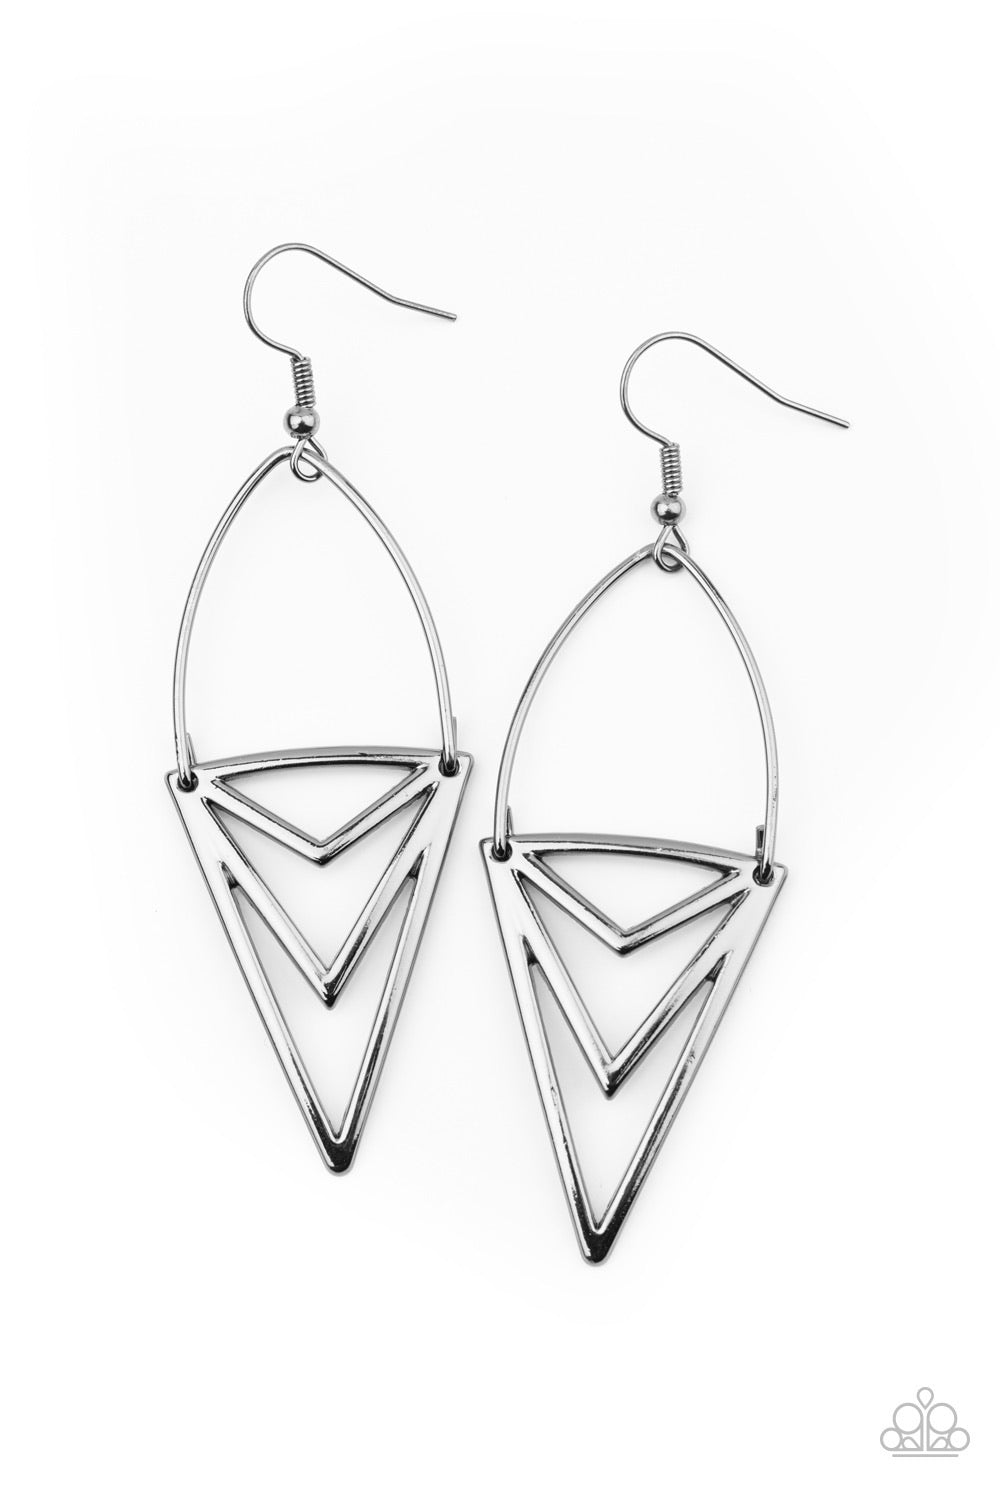 Proceed With Caution Earrings - Black